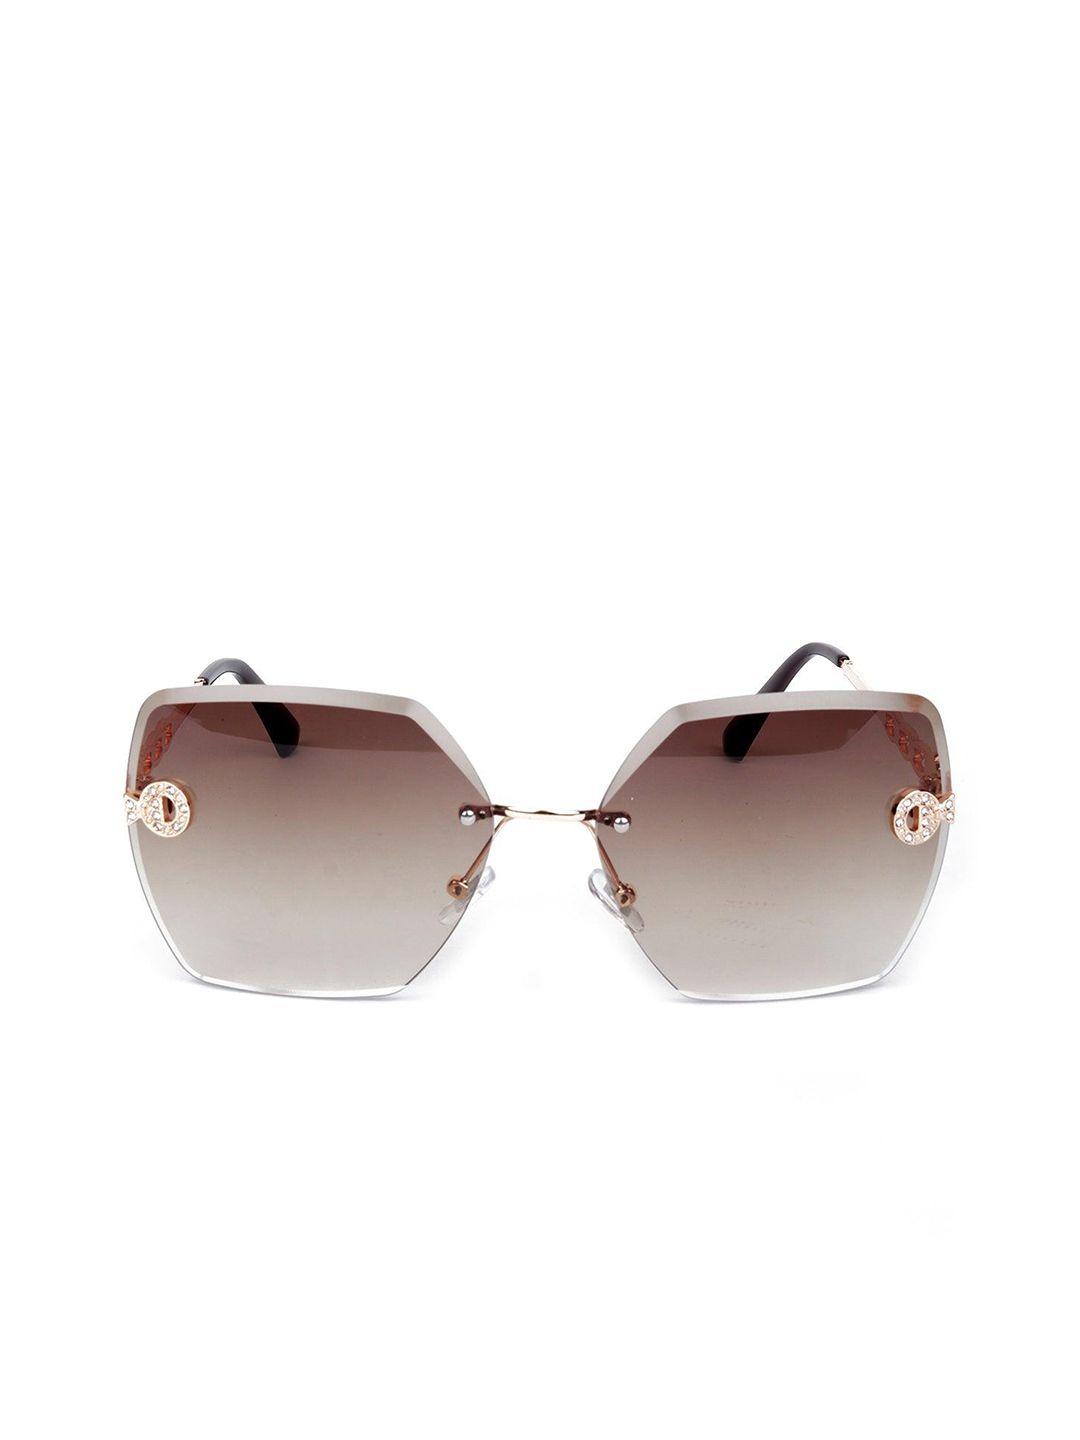 odette-women-oversized-sunglasses-with-uv-protected-lens-diw259